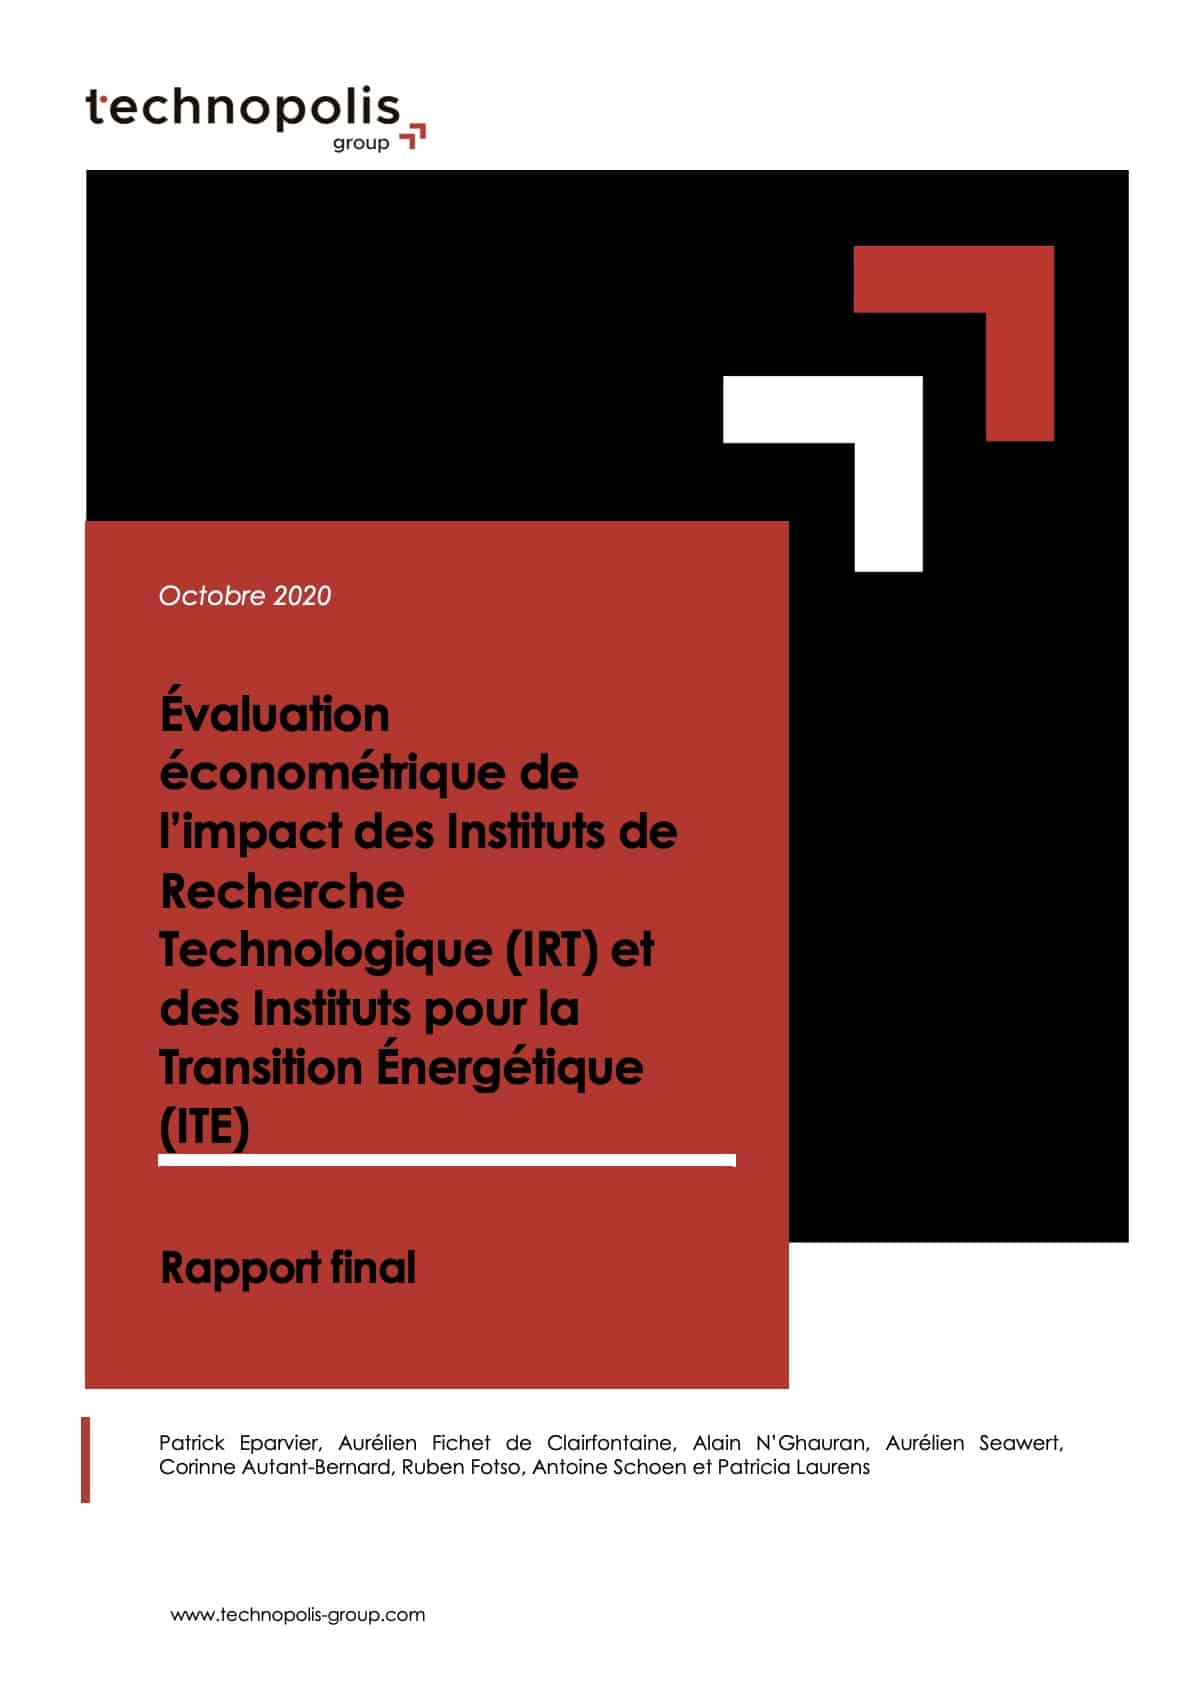 Econometric evaluation of the impact of the French Technological Research Institutes